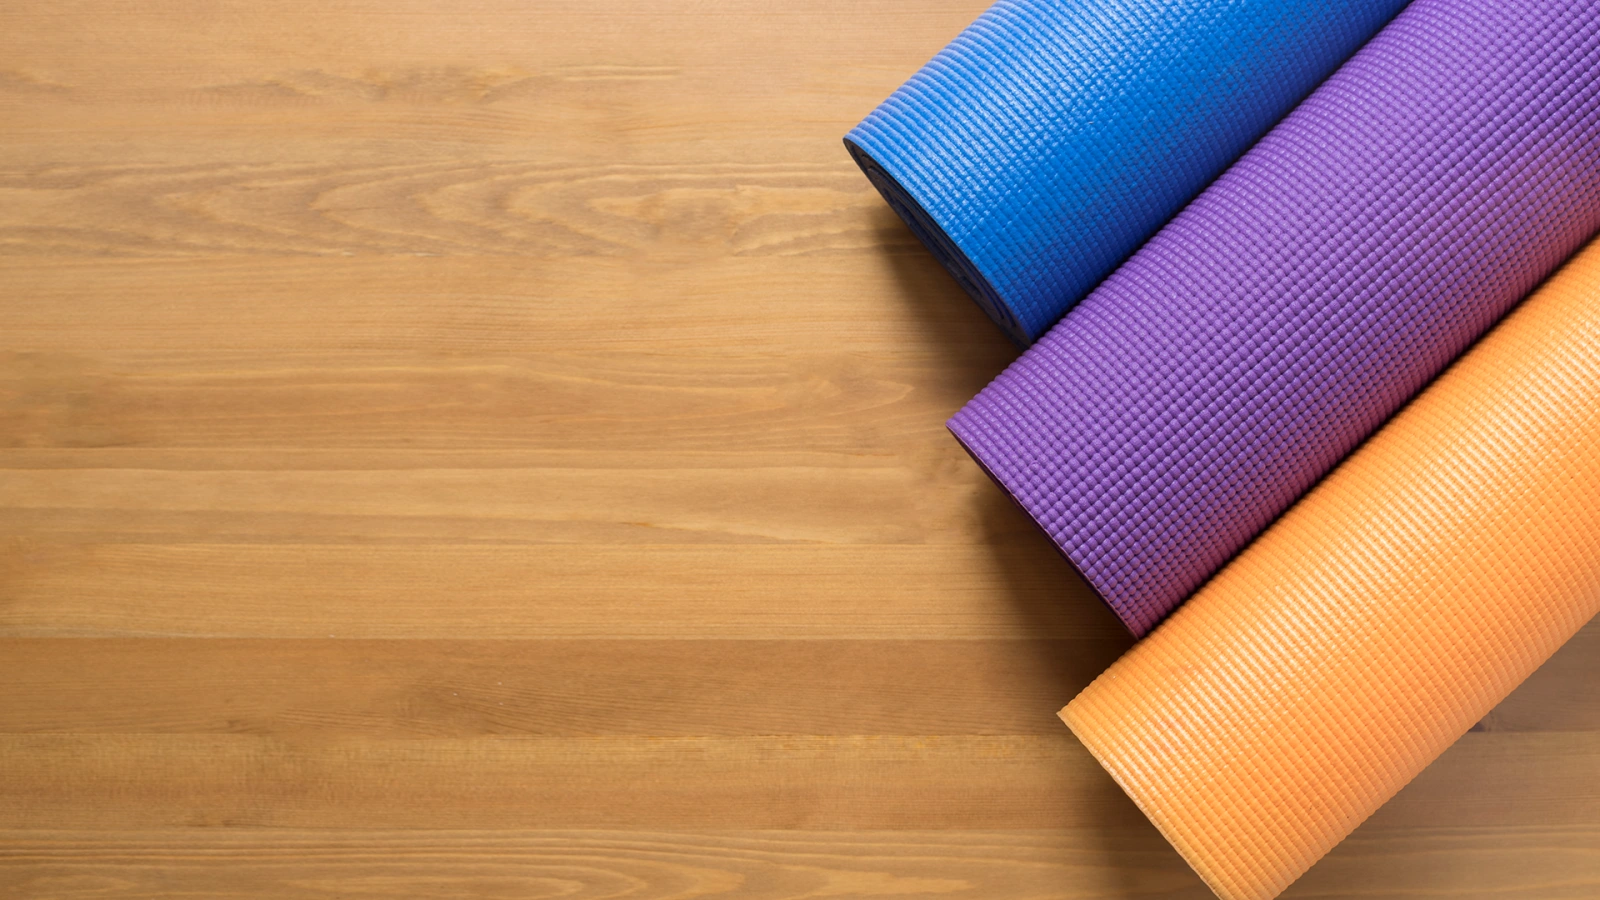 Things You Need for Yoga –